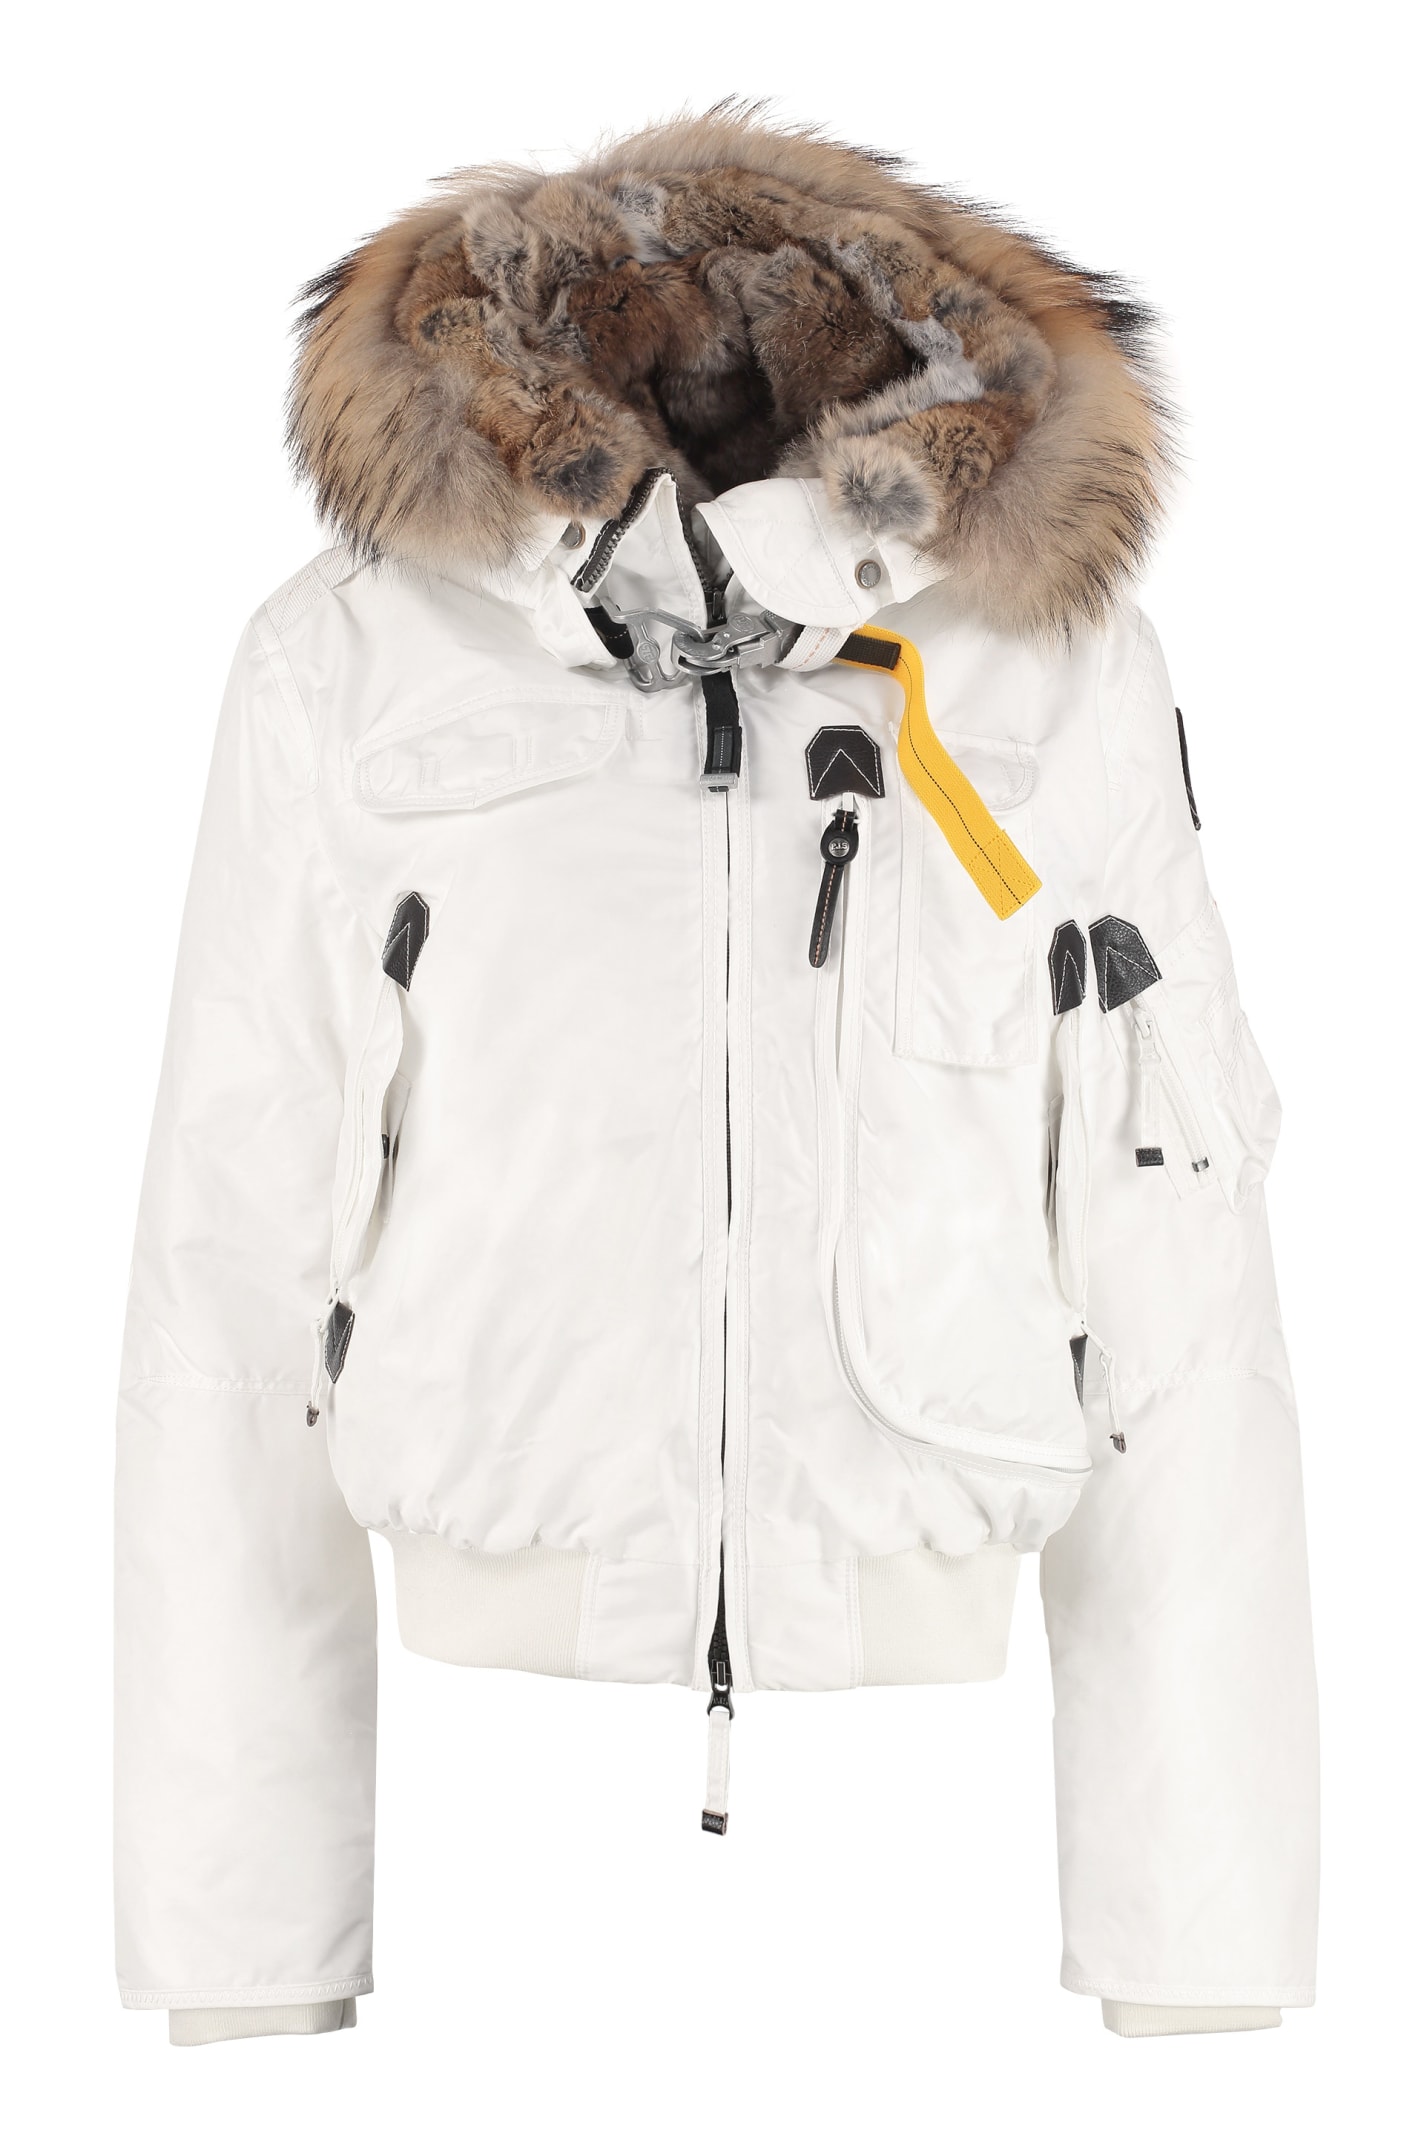 parajumpers white jacket